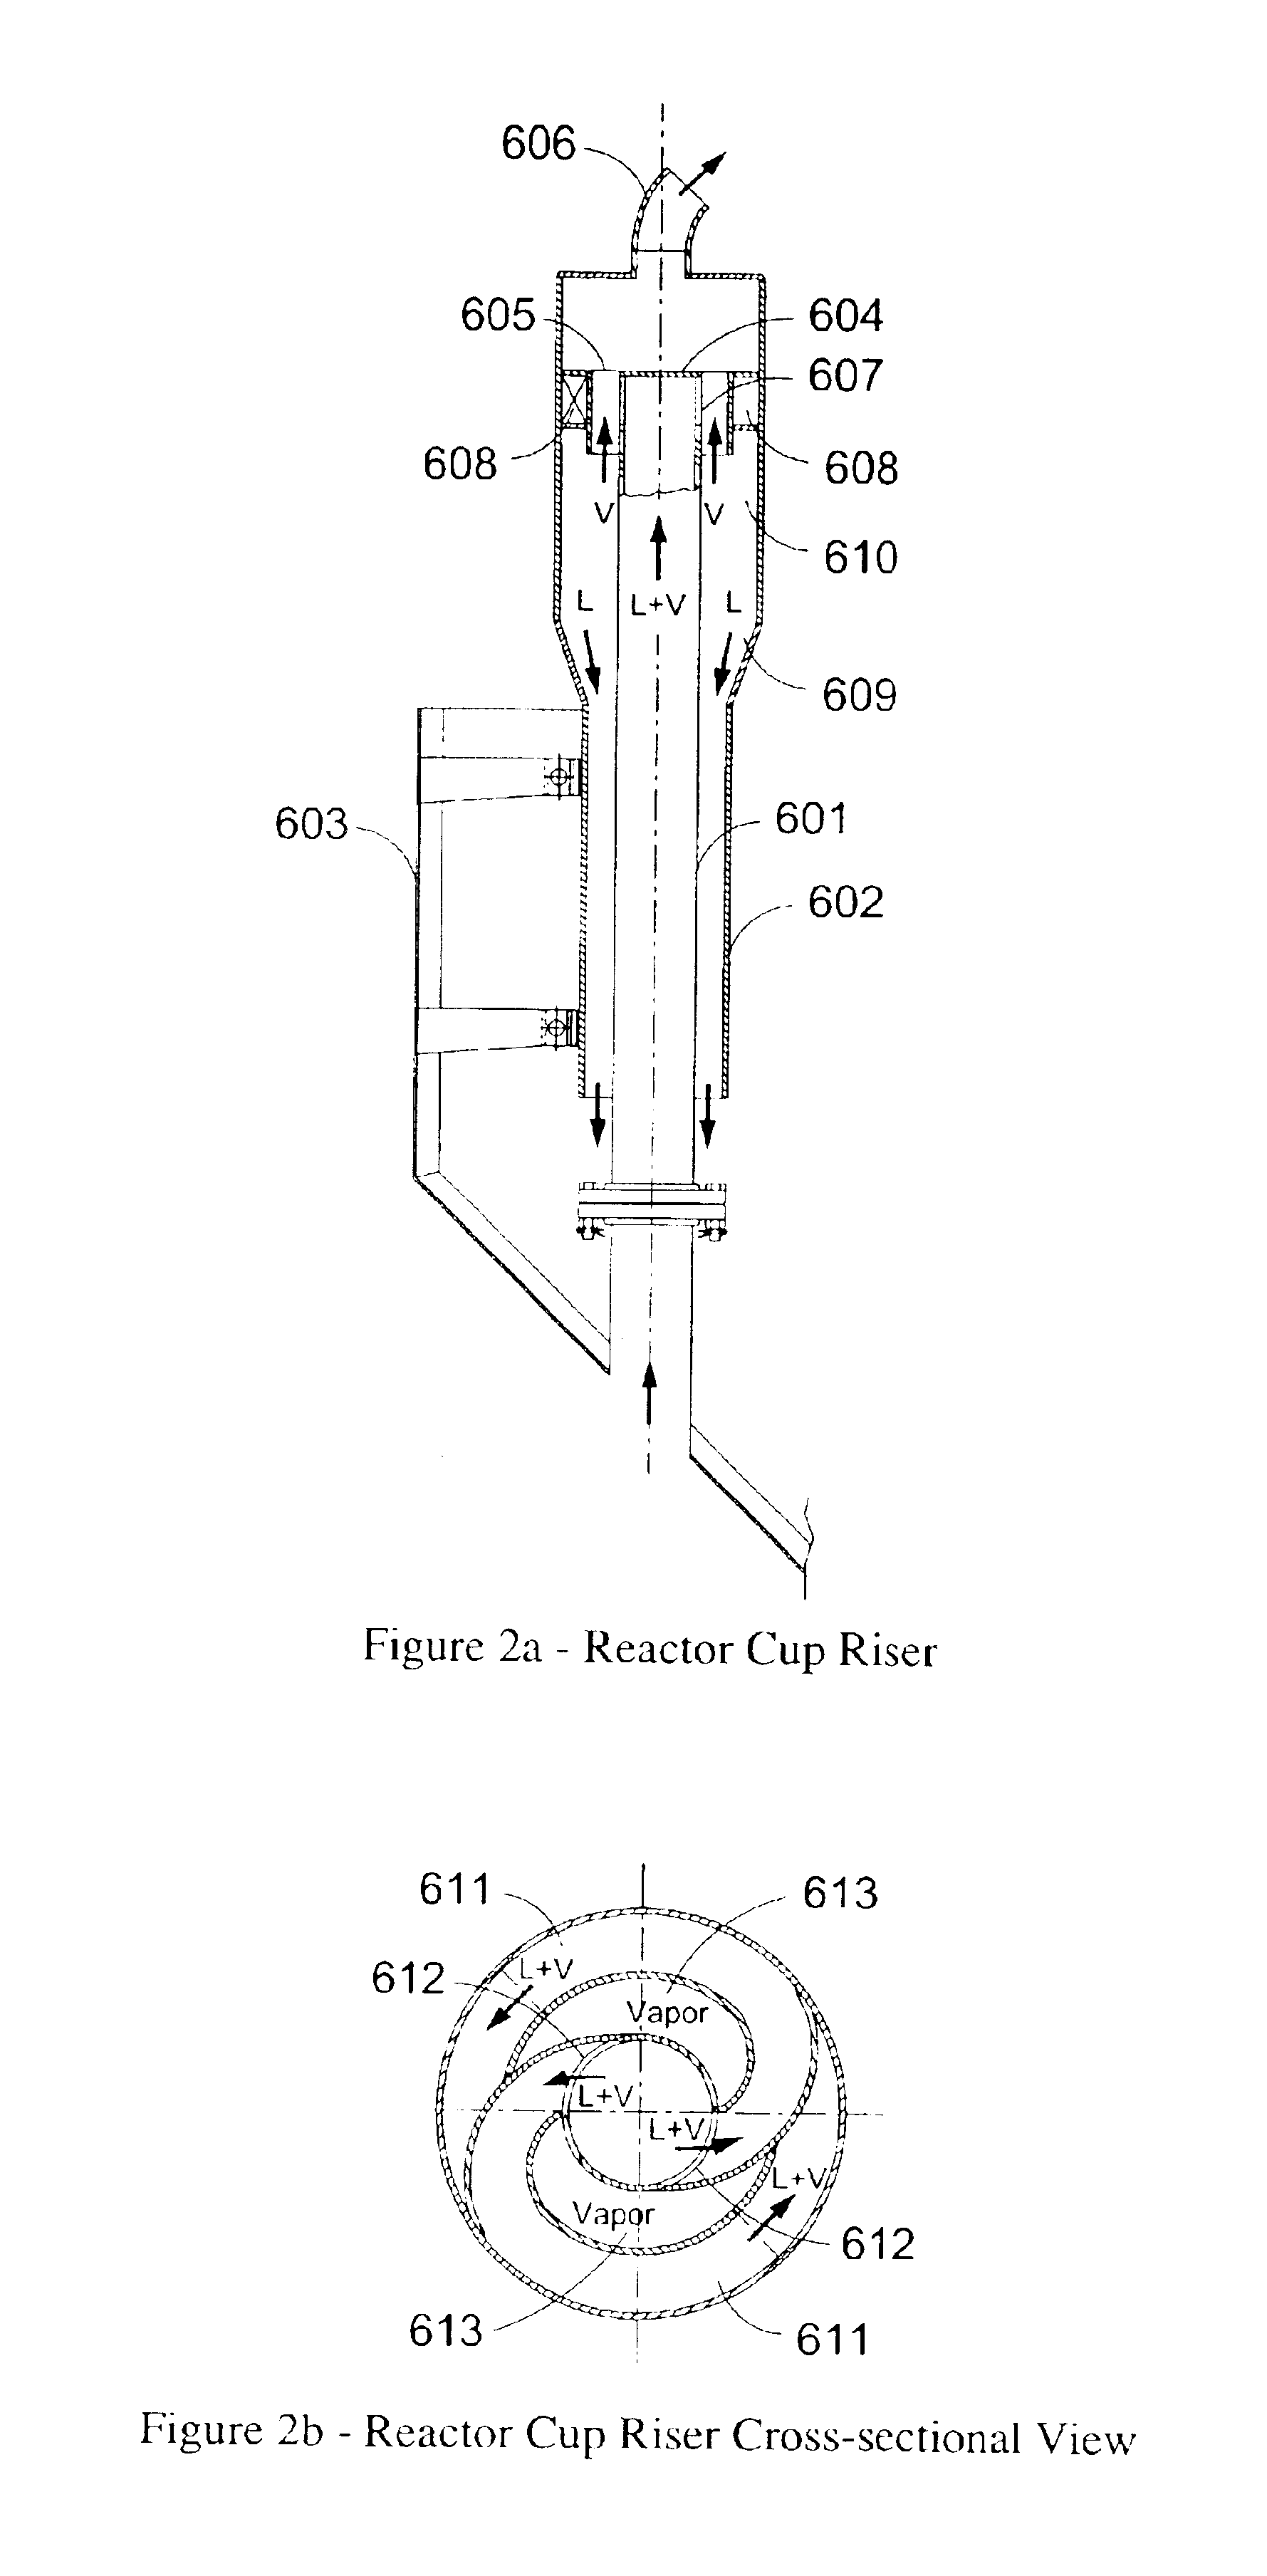 Apparatus for hydrocracking and/or hydrogenating fossil fuels